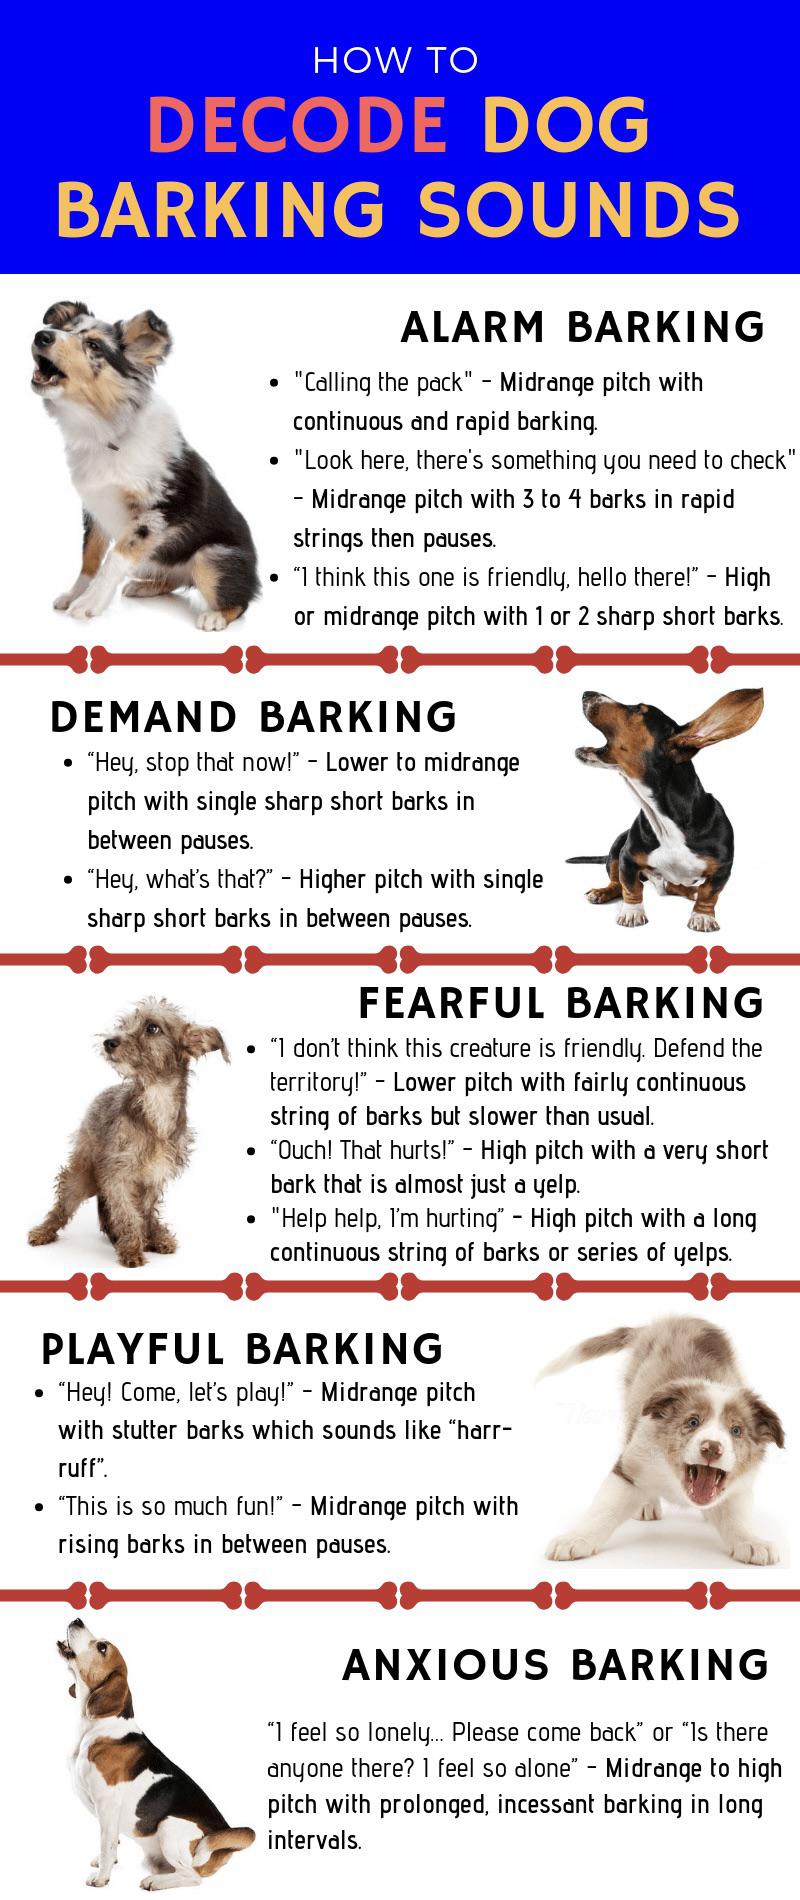 dog - How To Decode Dog Barking Sounds Alarm Barking "Calling the pack" Midrange pitch with continuous and rapid barking. "Look here, there's something you need to check" Midrange pitch with 3 to 4 barks in rapid strings then pauses. I think this one is…